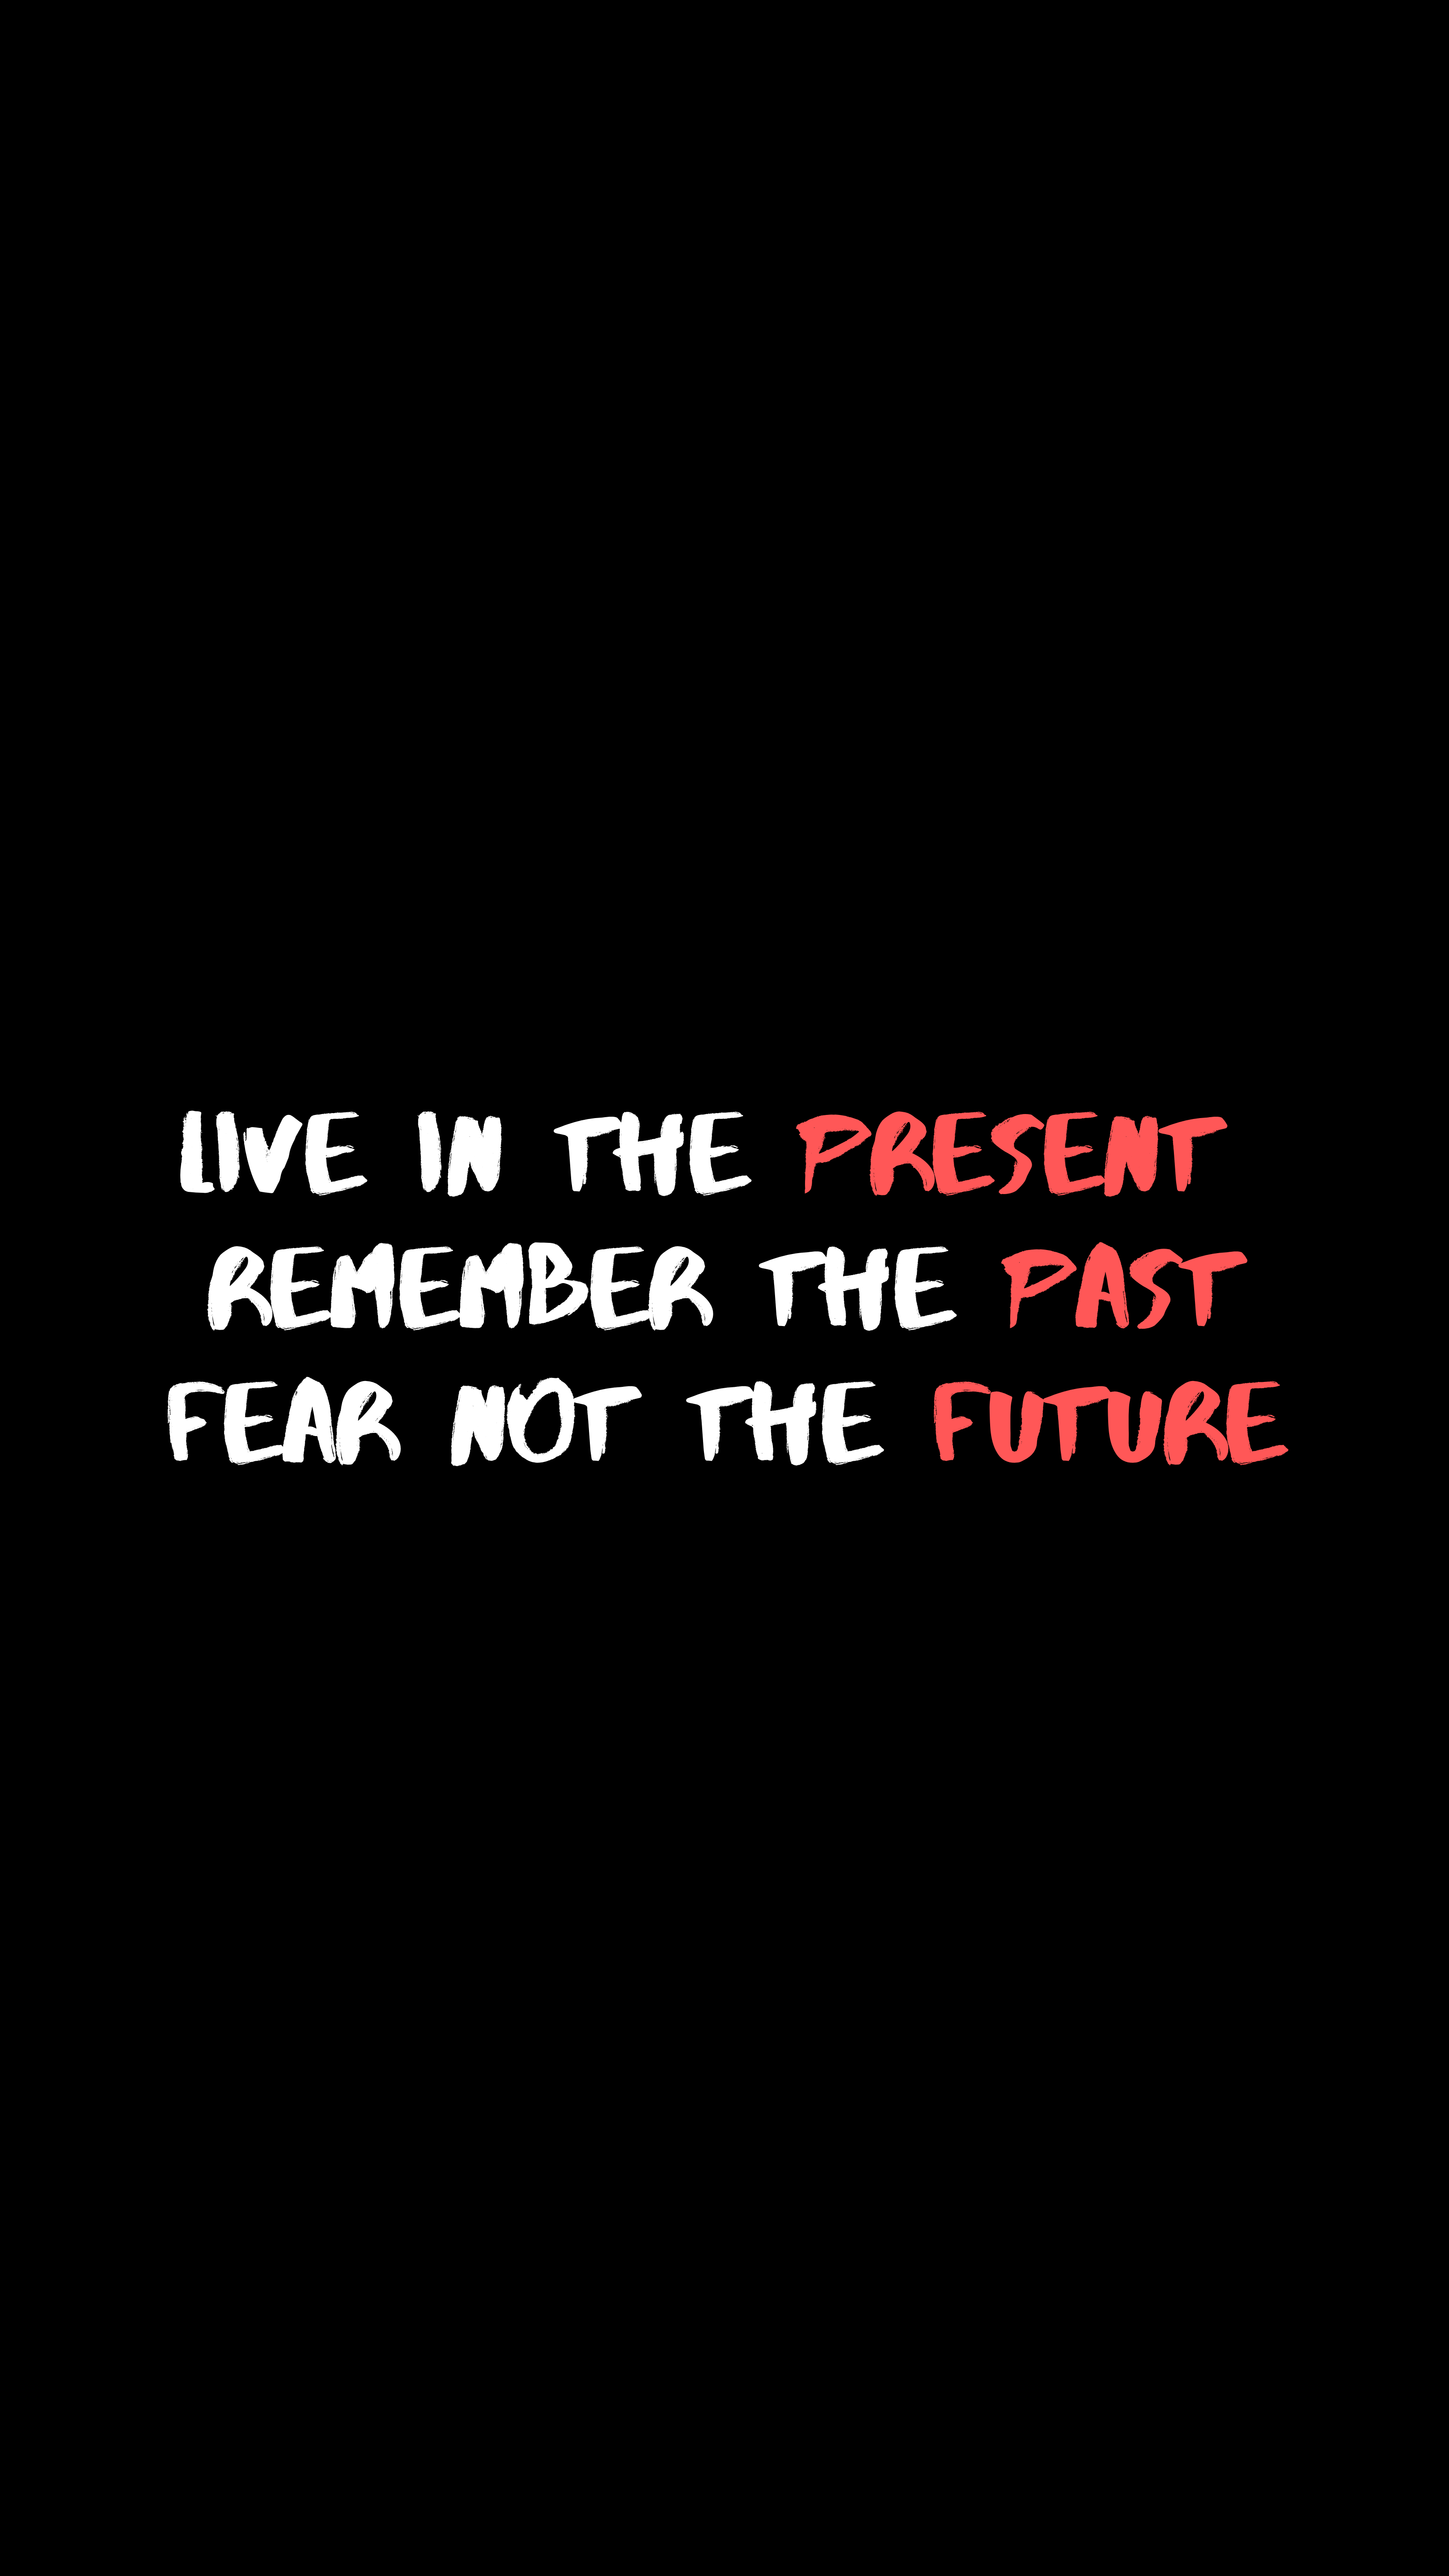 motivation, words, future, quotation, inspiration, quote, present, past cell phone wallpapers